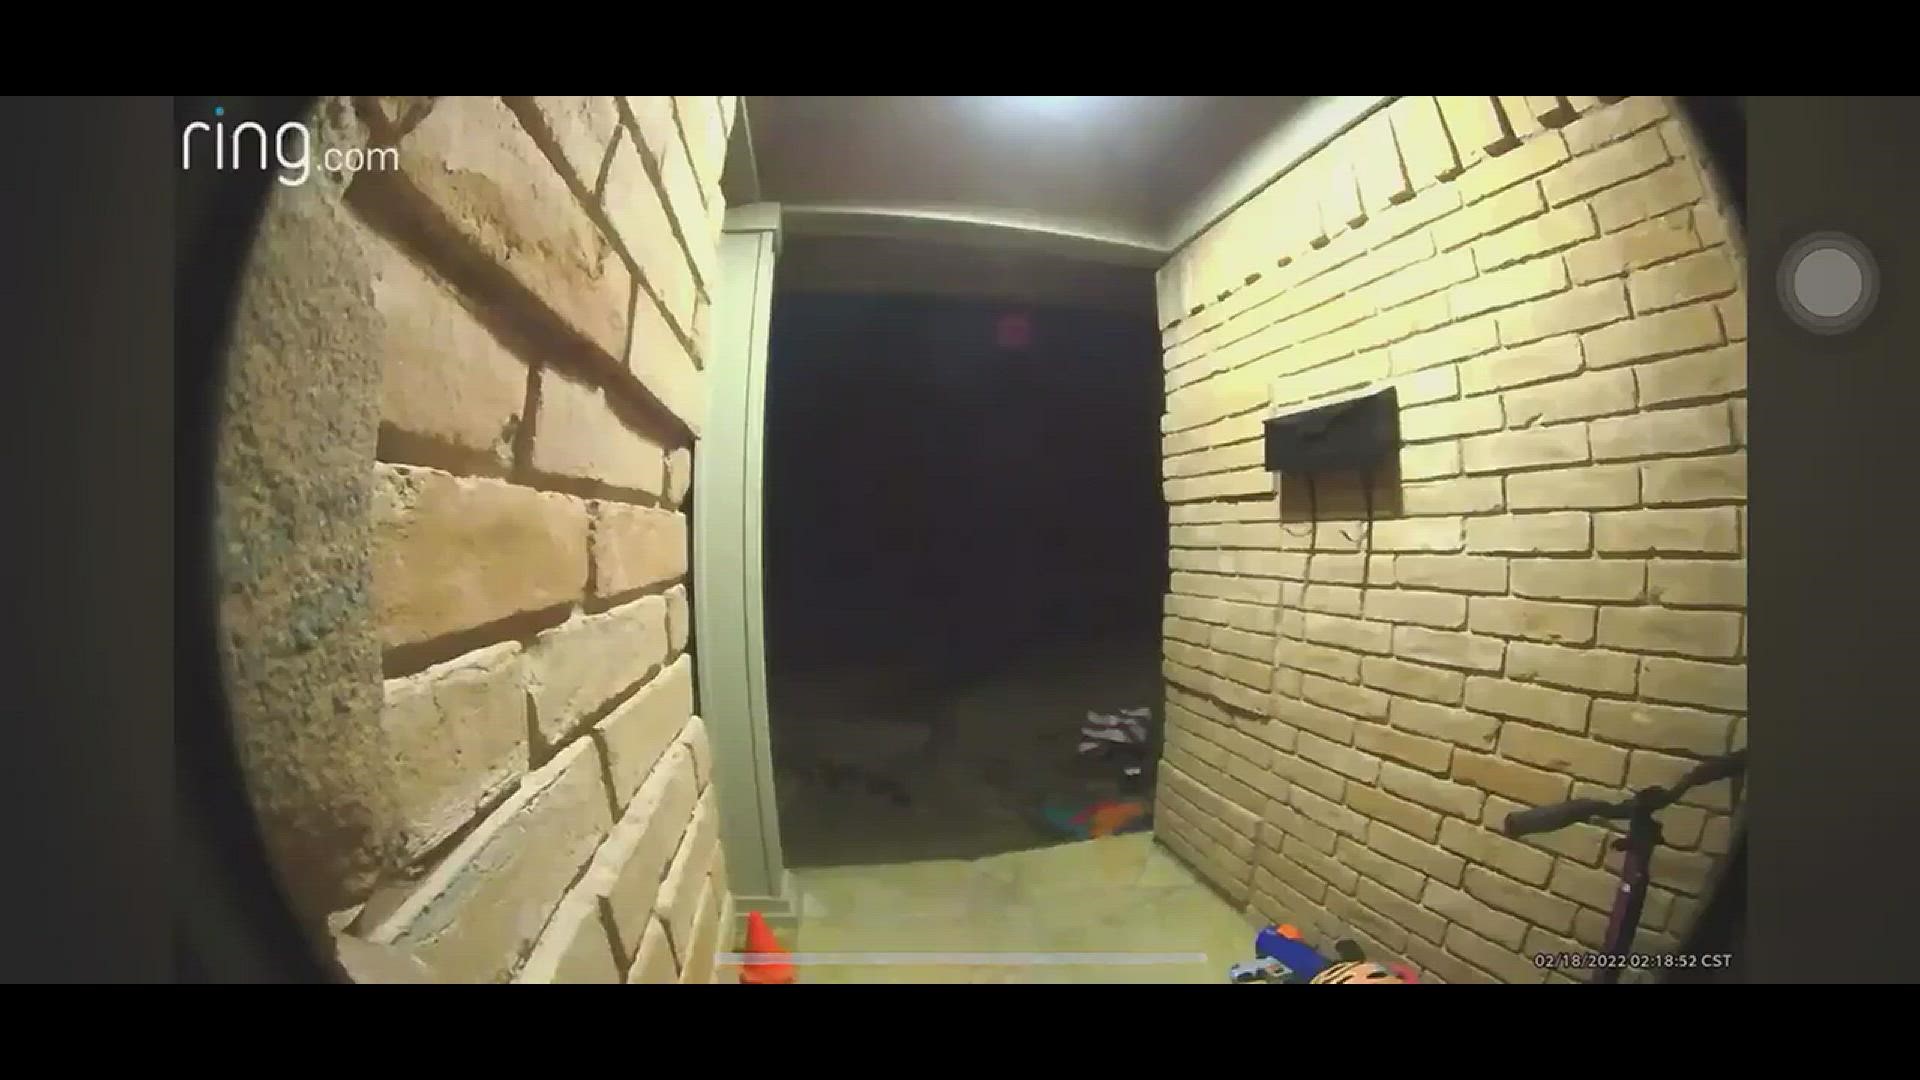 The same coyote that attacked a 2-year-old was caught on camera stealing a DoorDash order from a home in Lake Highlands. The child is expected to recover.